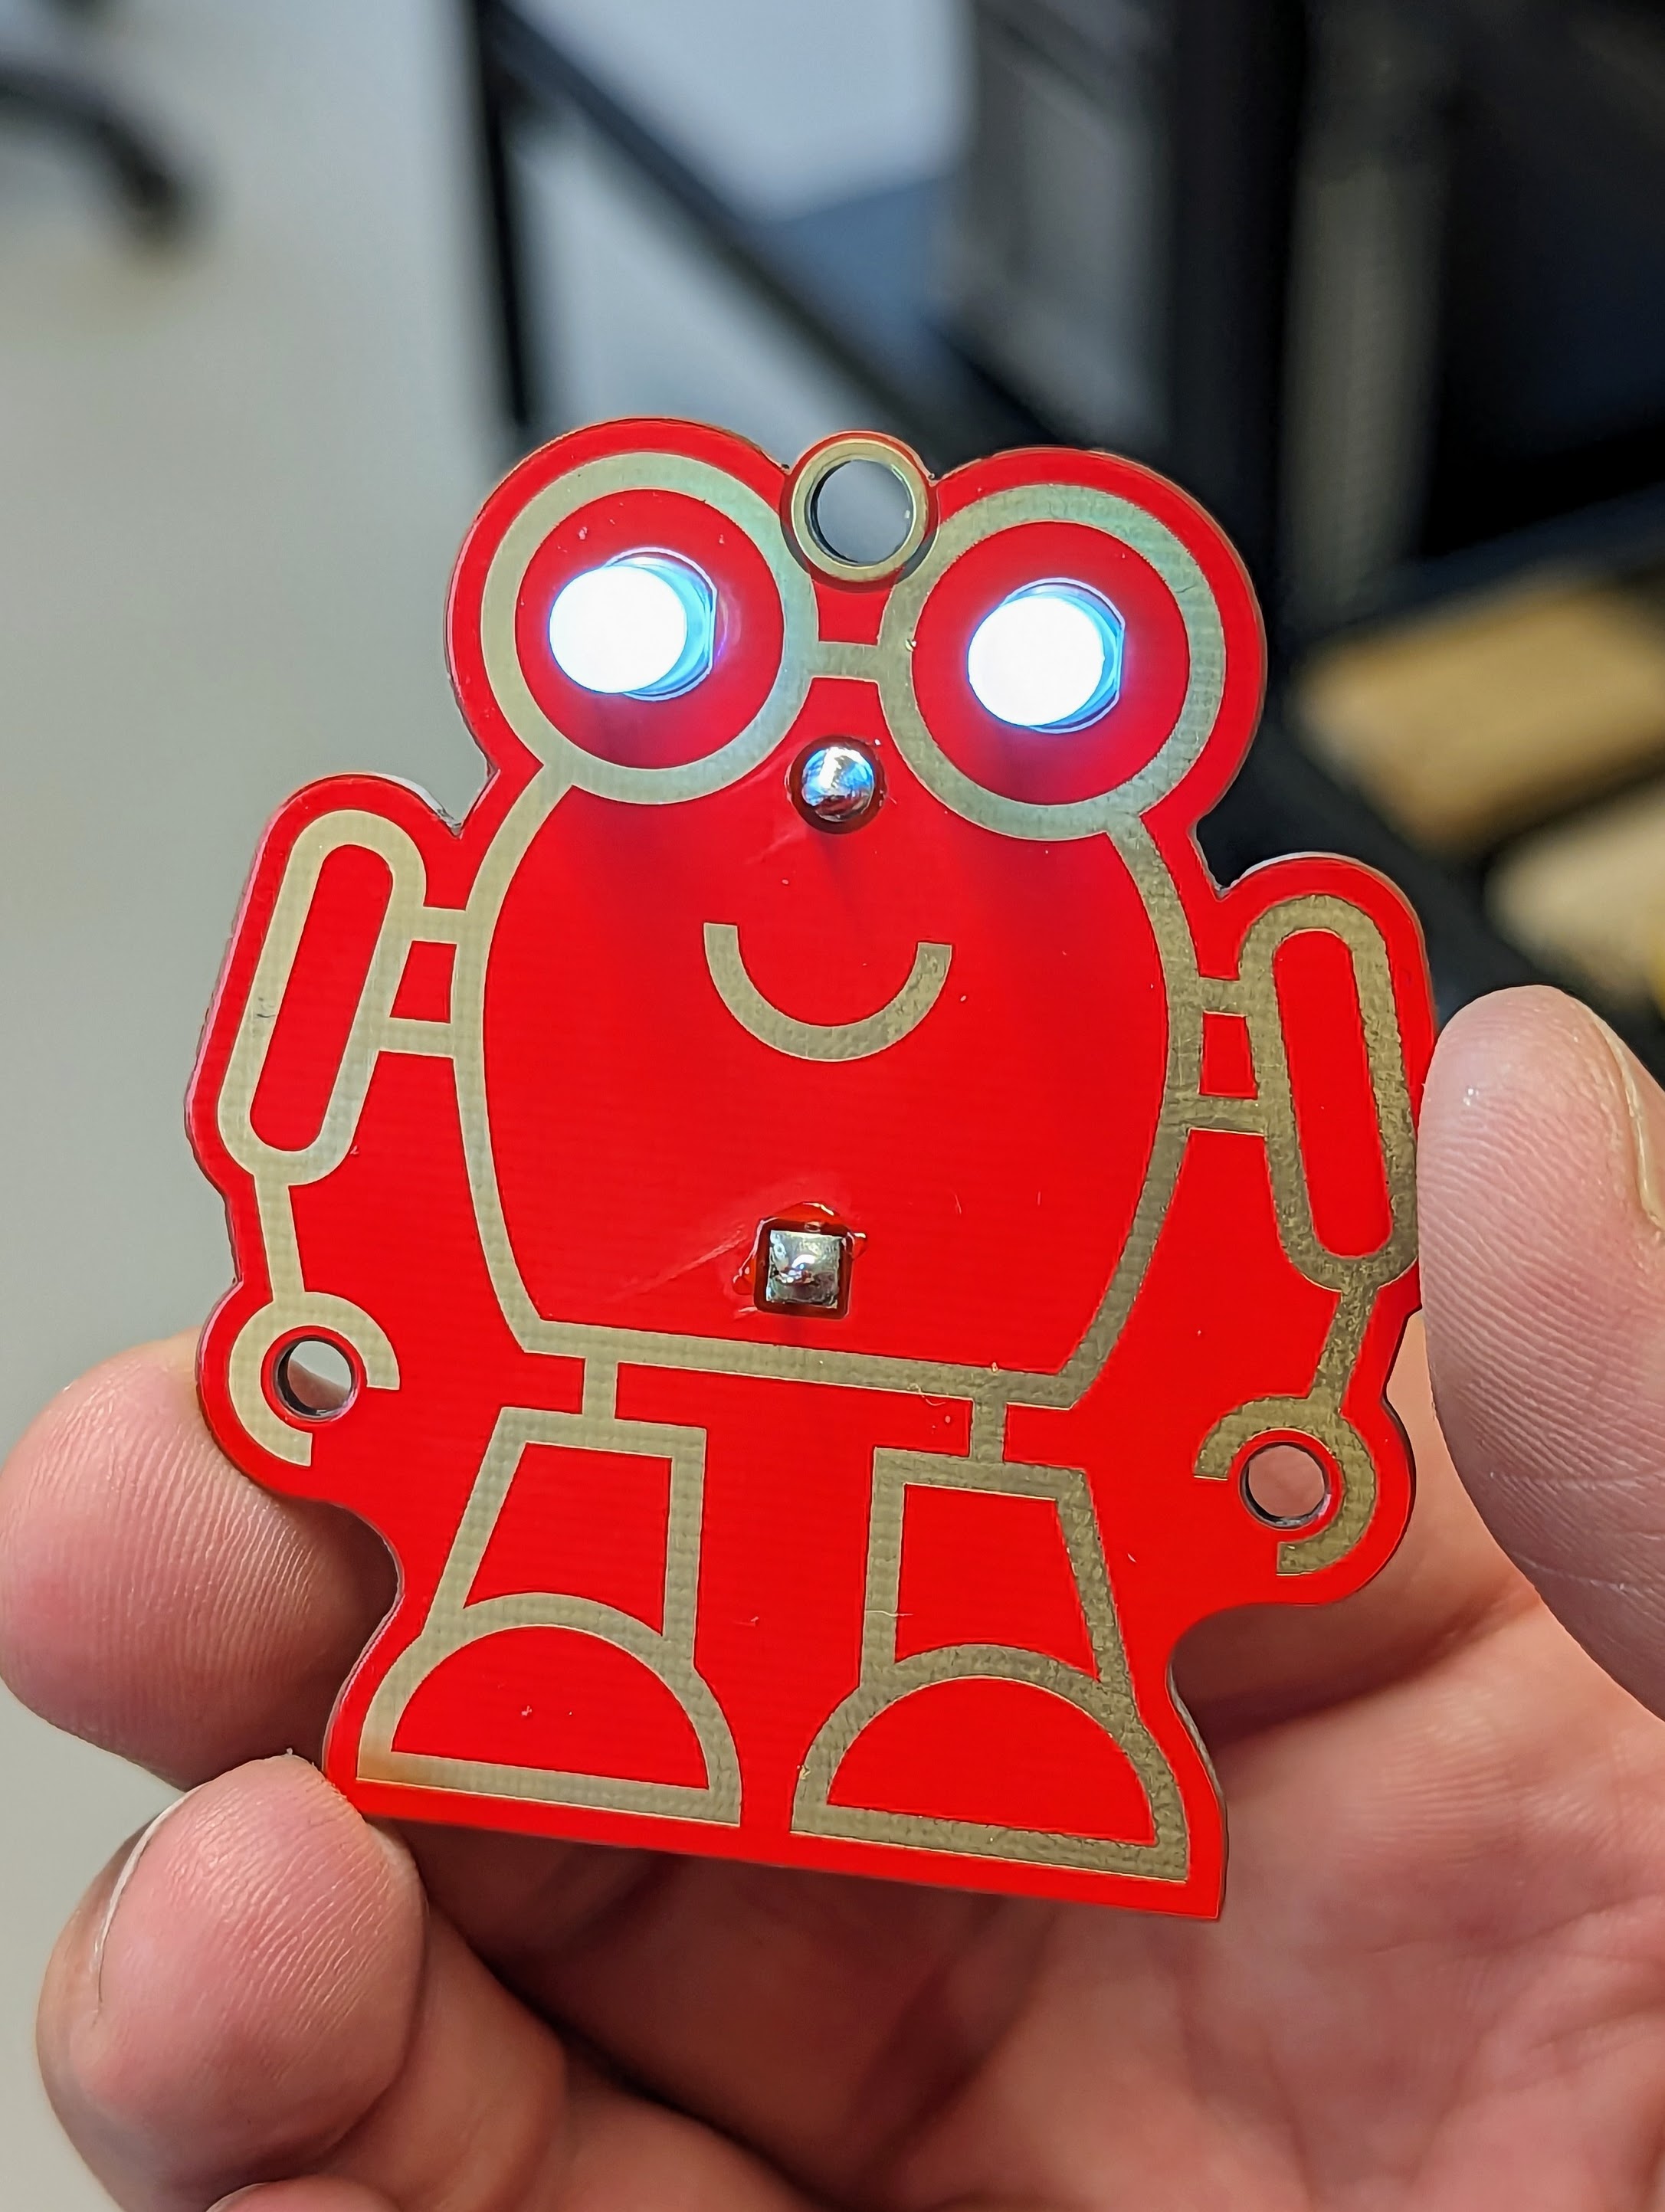 Robo Robin soldering kit - The very simple and funny red robot kit